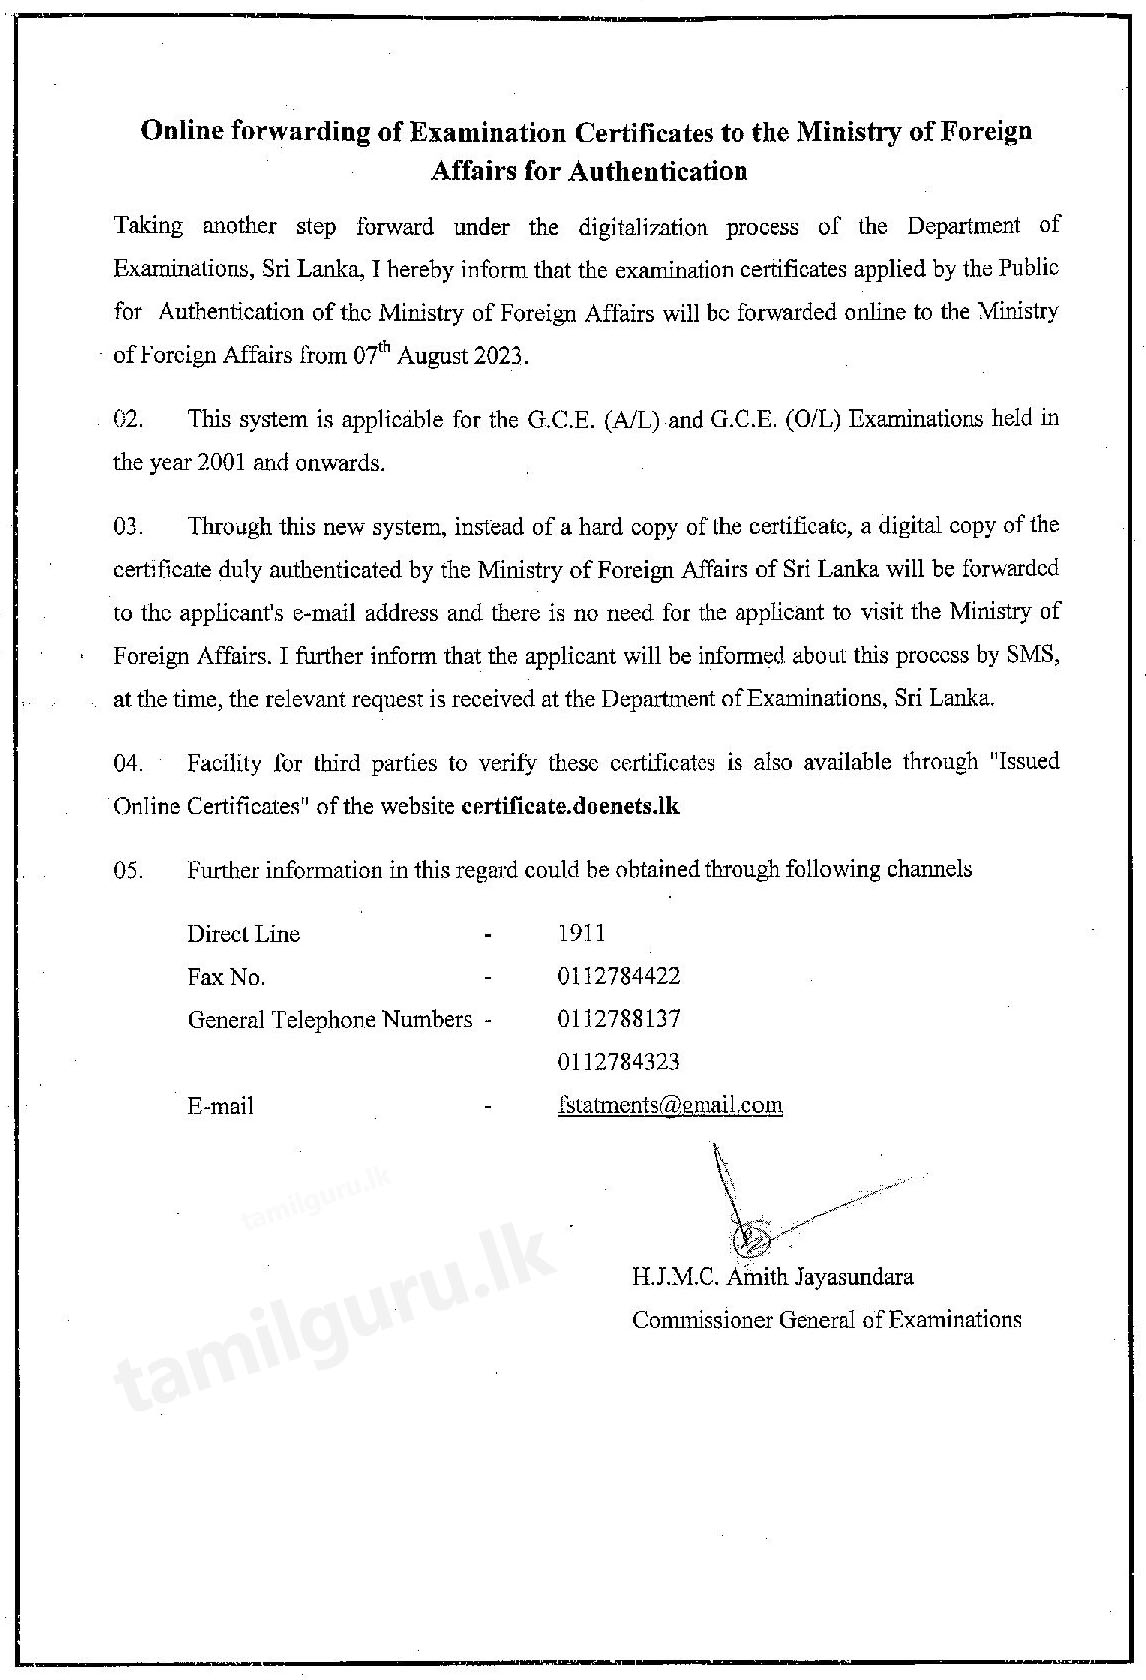 Online forwarding of Examination Certificates to the Ministry of Foreign Affairs for Authentication